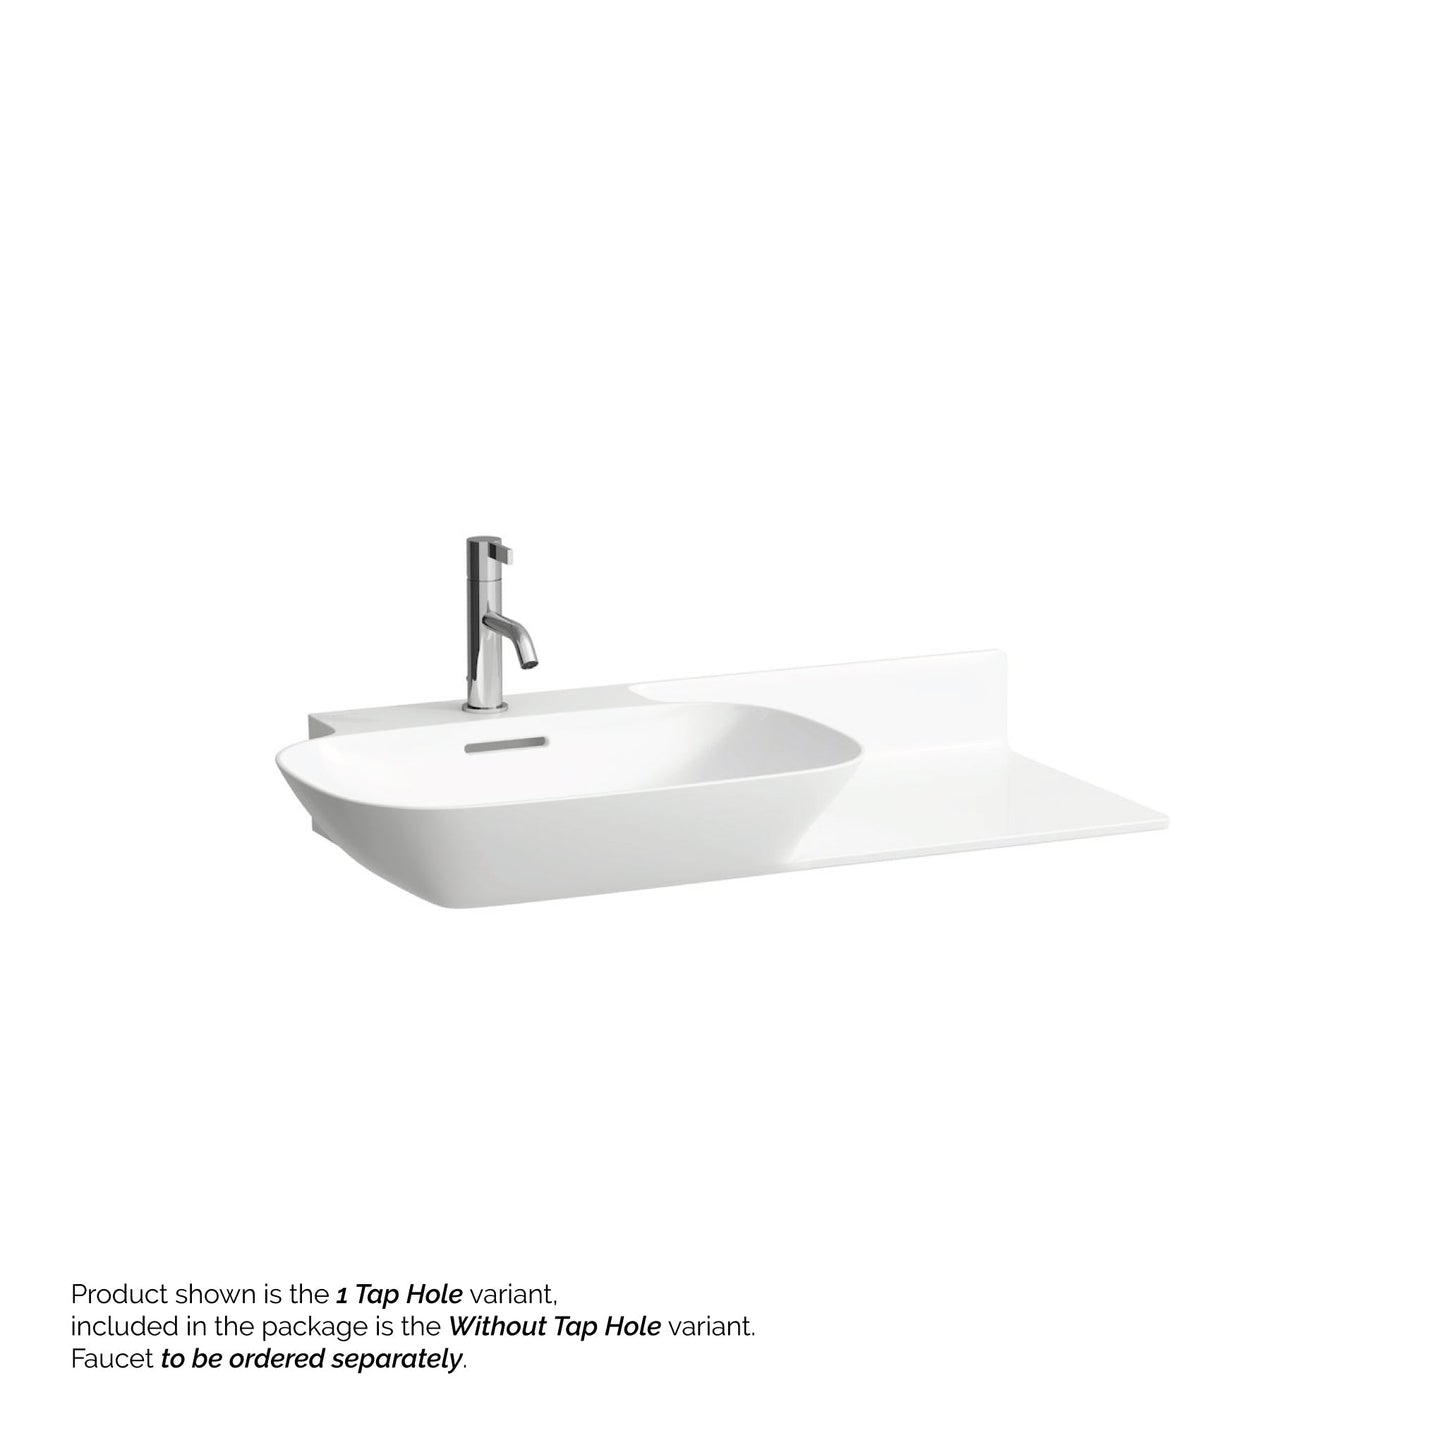 Laufen Ino 35" x 18" White Wall-Mounted Shelf-Right Bathroom Sink Without Faucet Hole